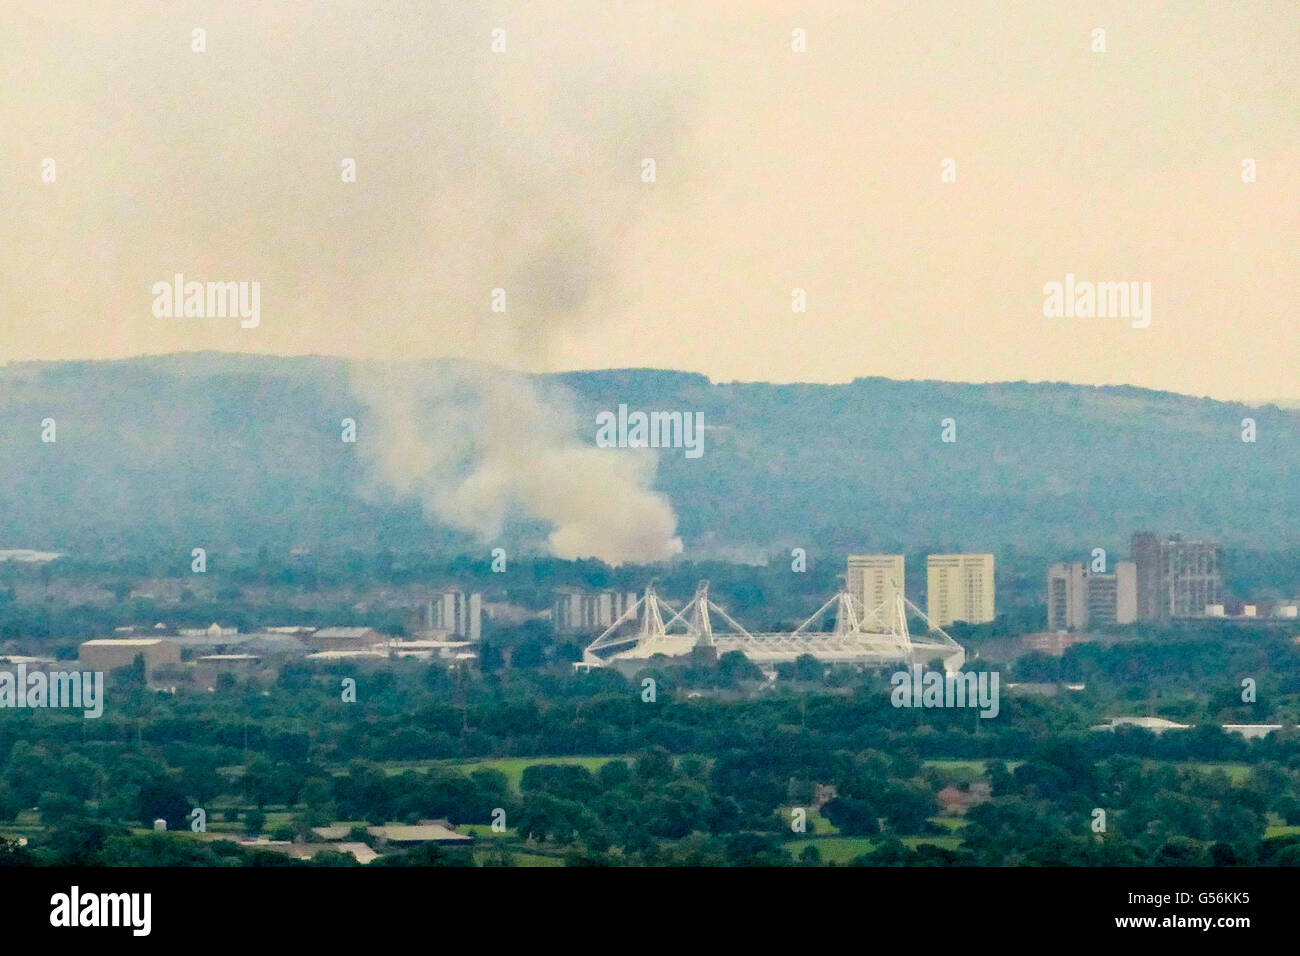 Preston, UK. 21st June 2016. A major fire at Whitfire shavings,Preston. Can been seen over 10 miles away on Beacon fell in the Forest of Bowland.  10 fire crews have been tackling the blaze this morning. Some homes nearby have been evacuated.copyright. Gary Telford/Alamy live news Stock Photo